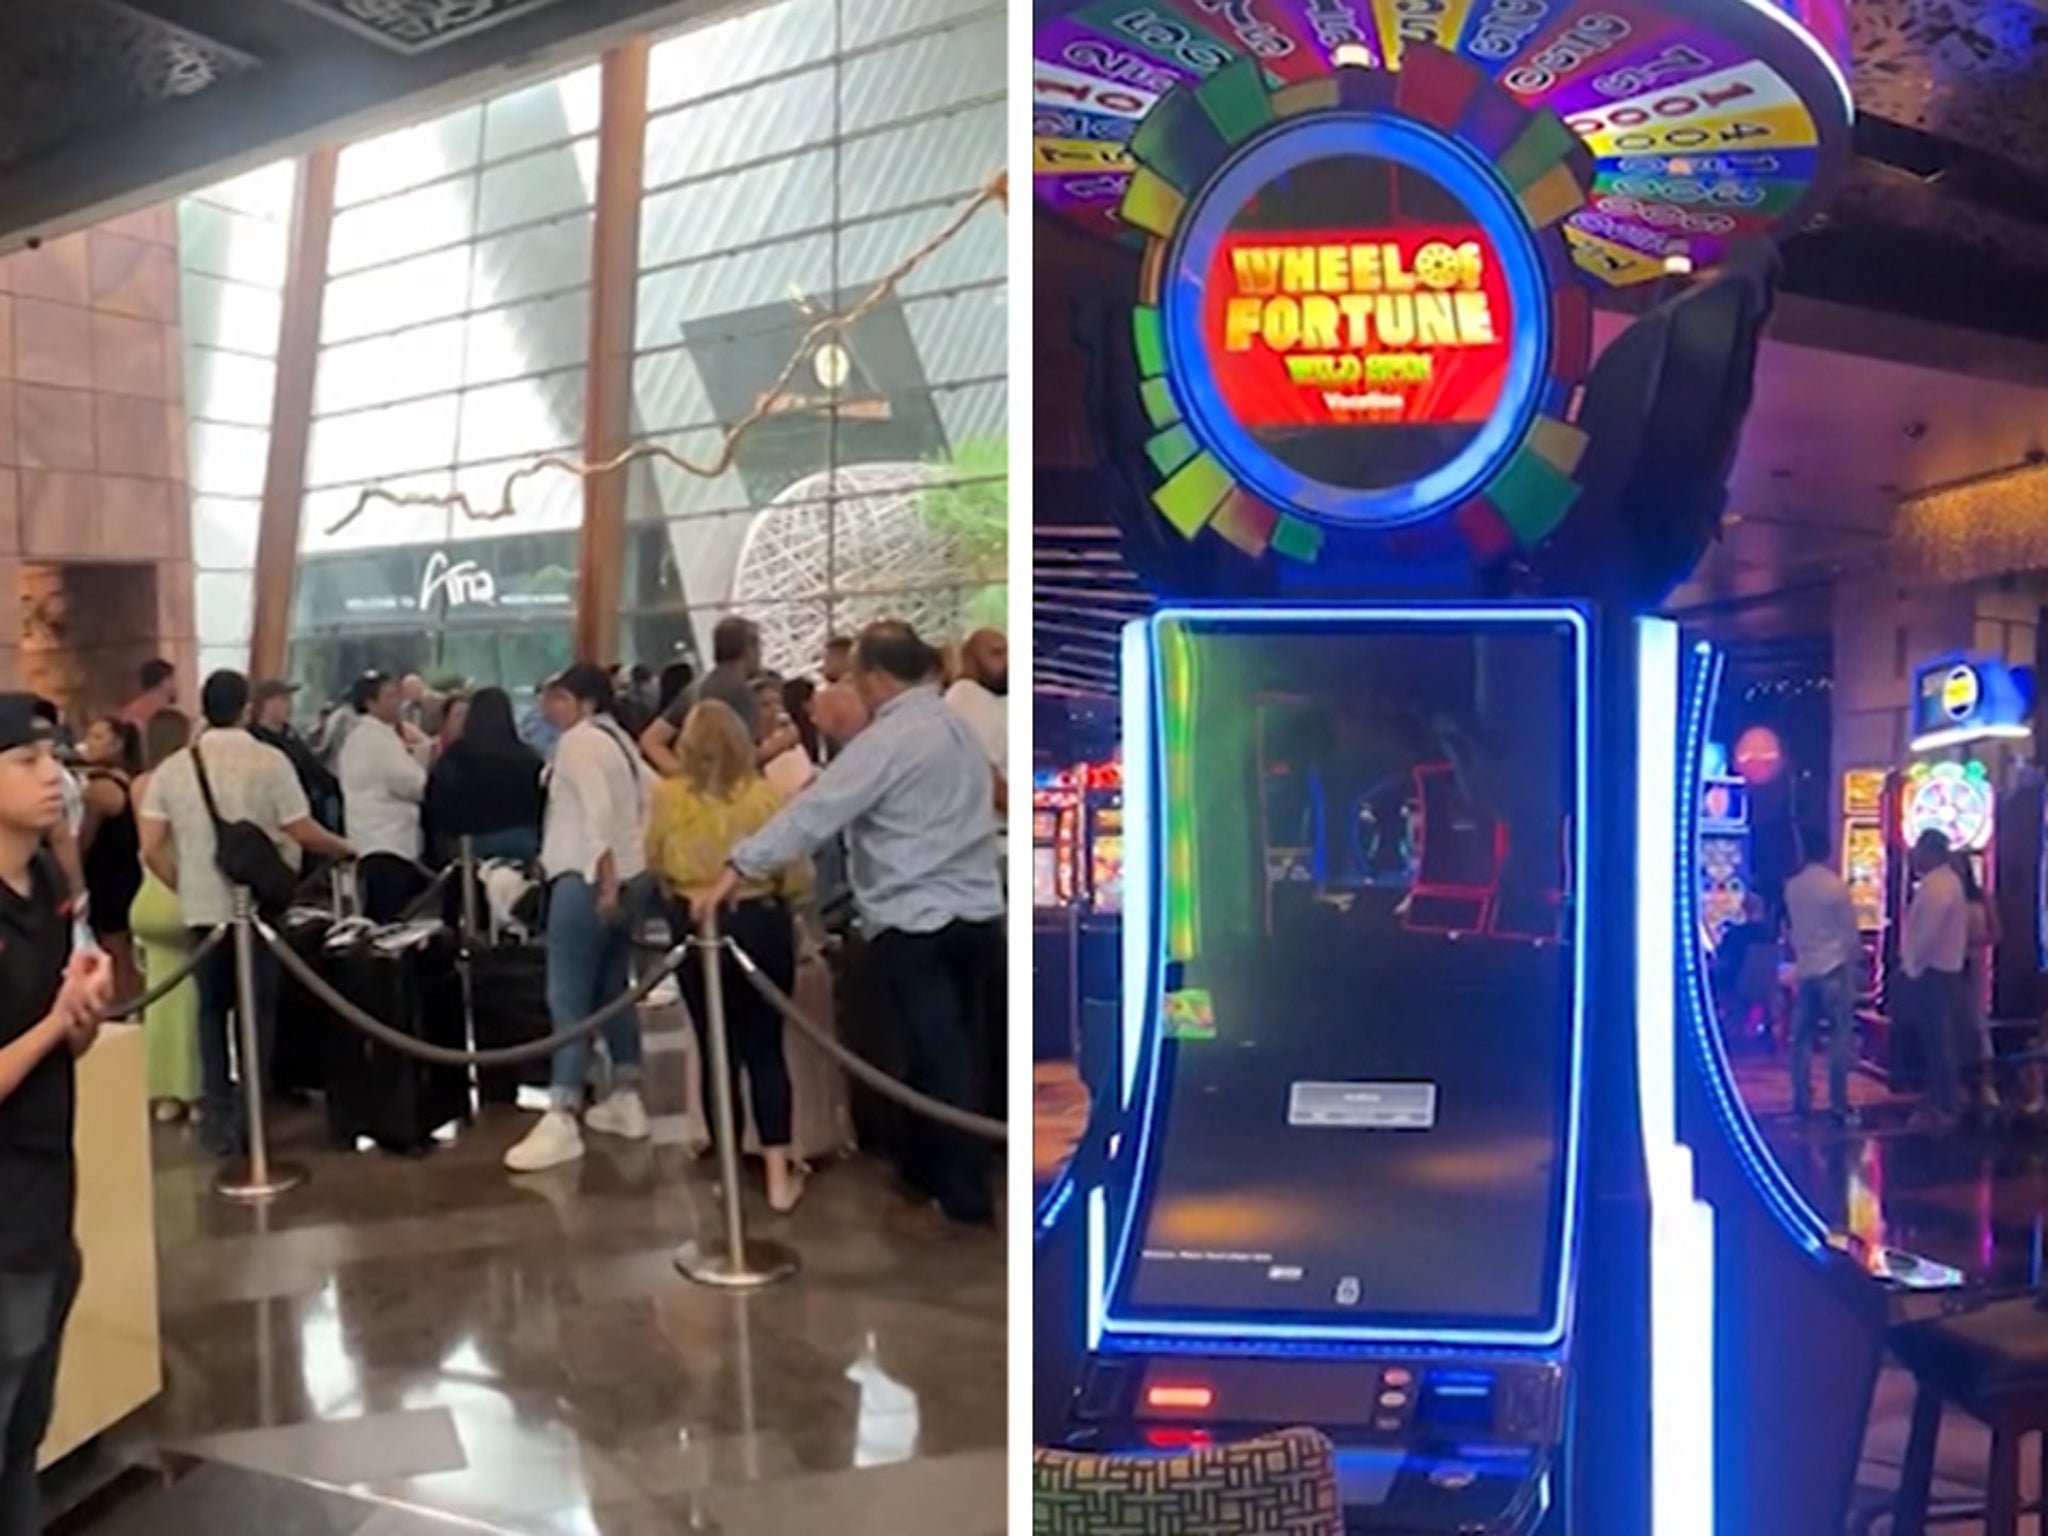 MGM casinos are STILL under siege with slot machines offline and huge lines  at check-in - five days after hackers first paralyzed the company